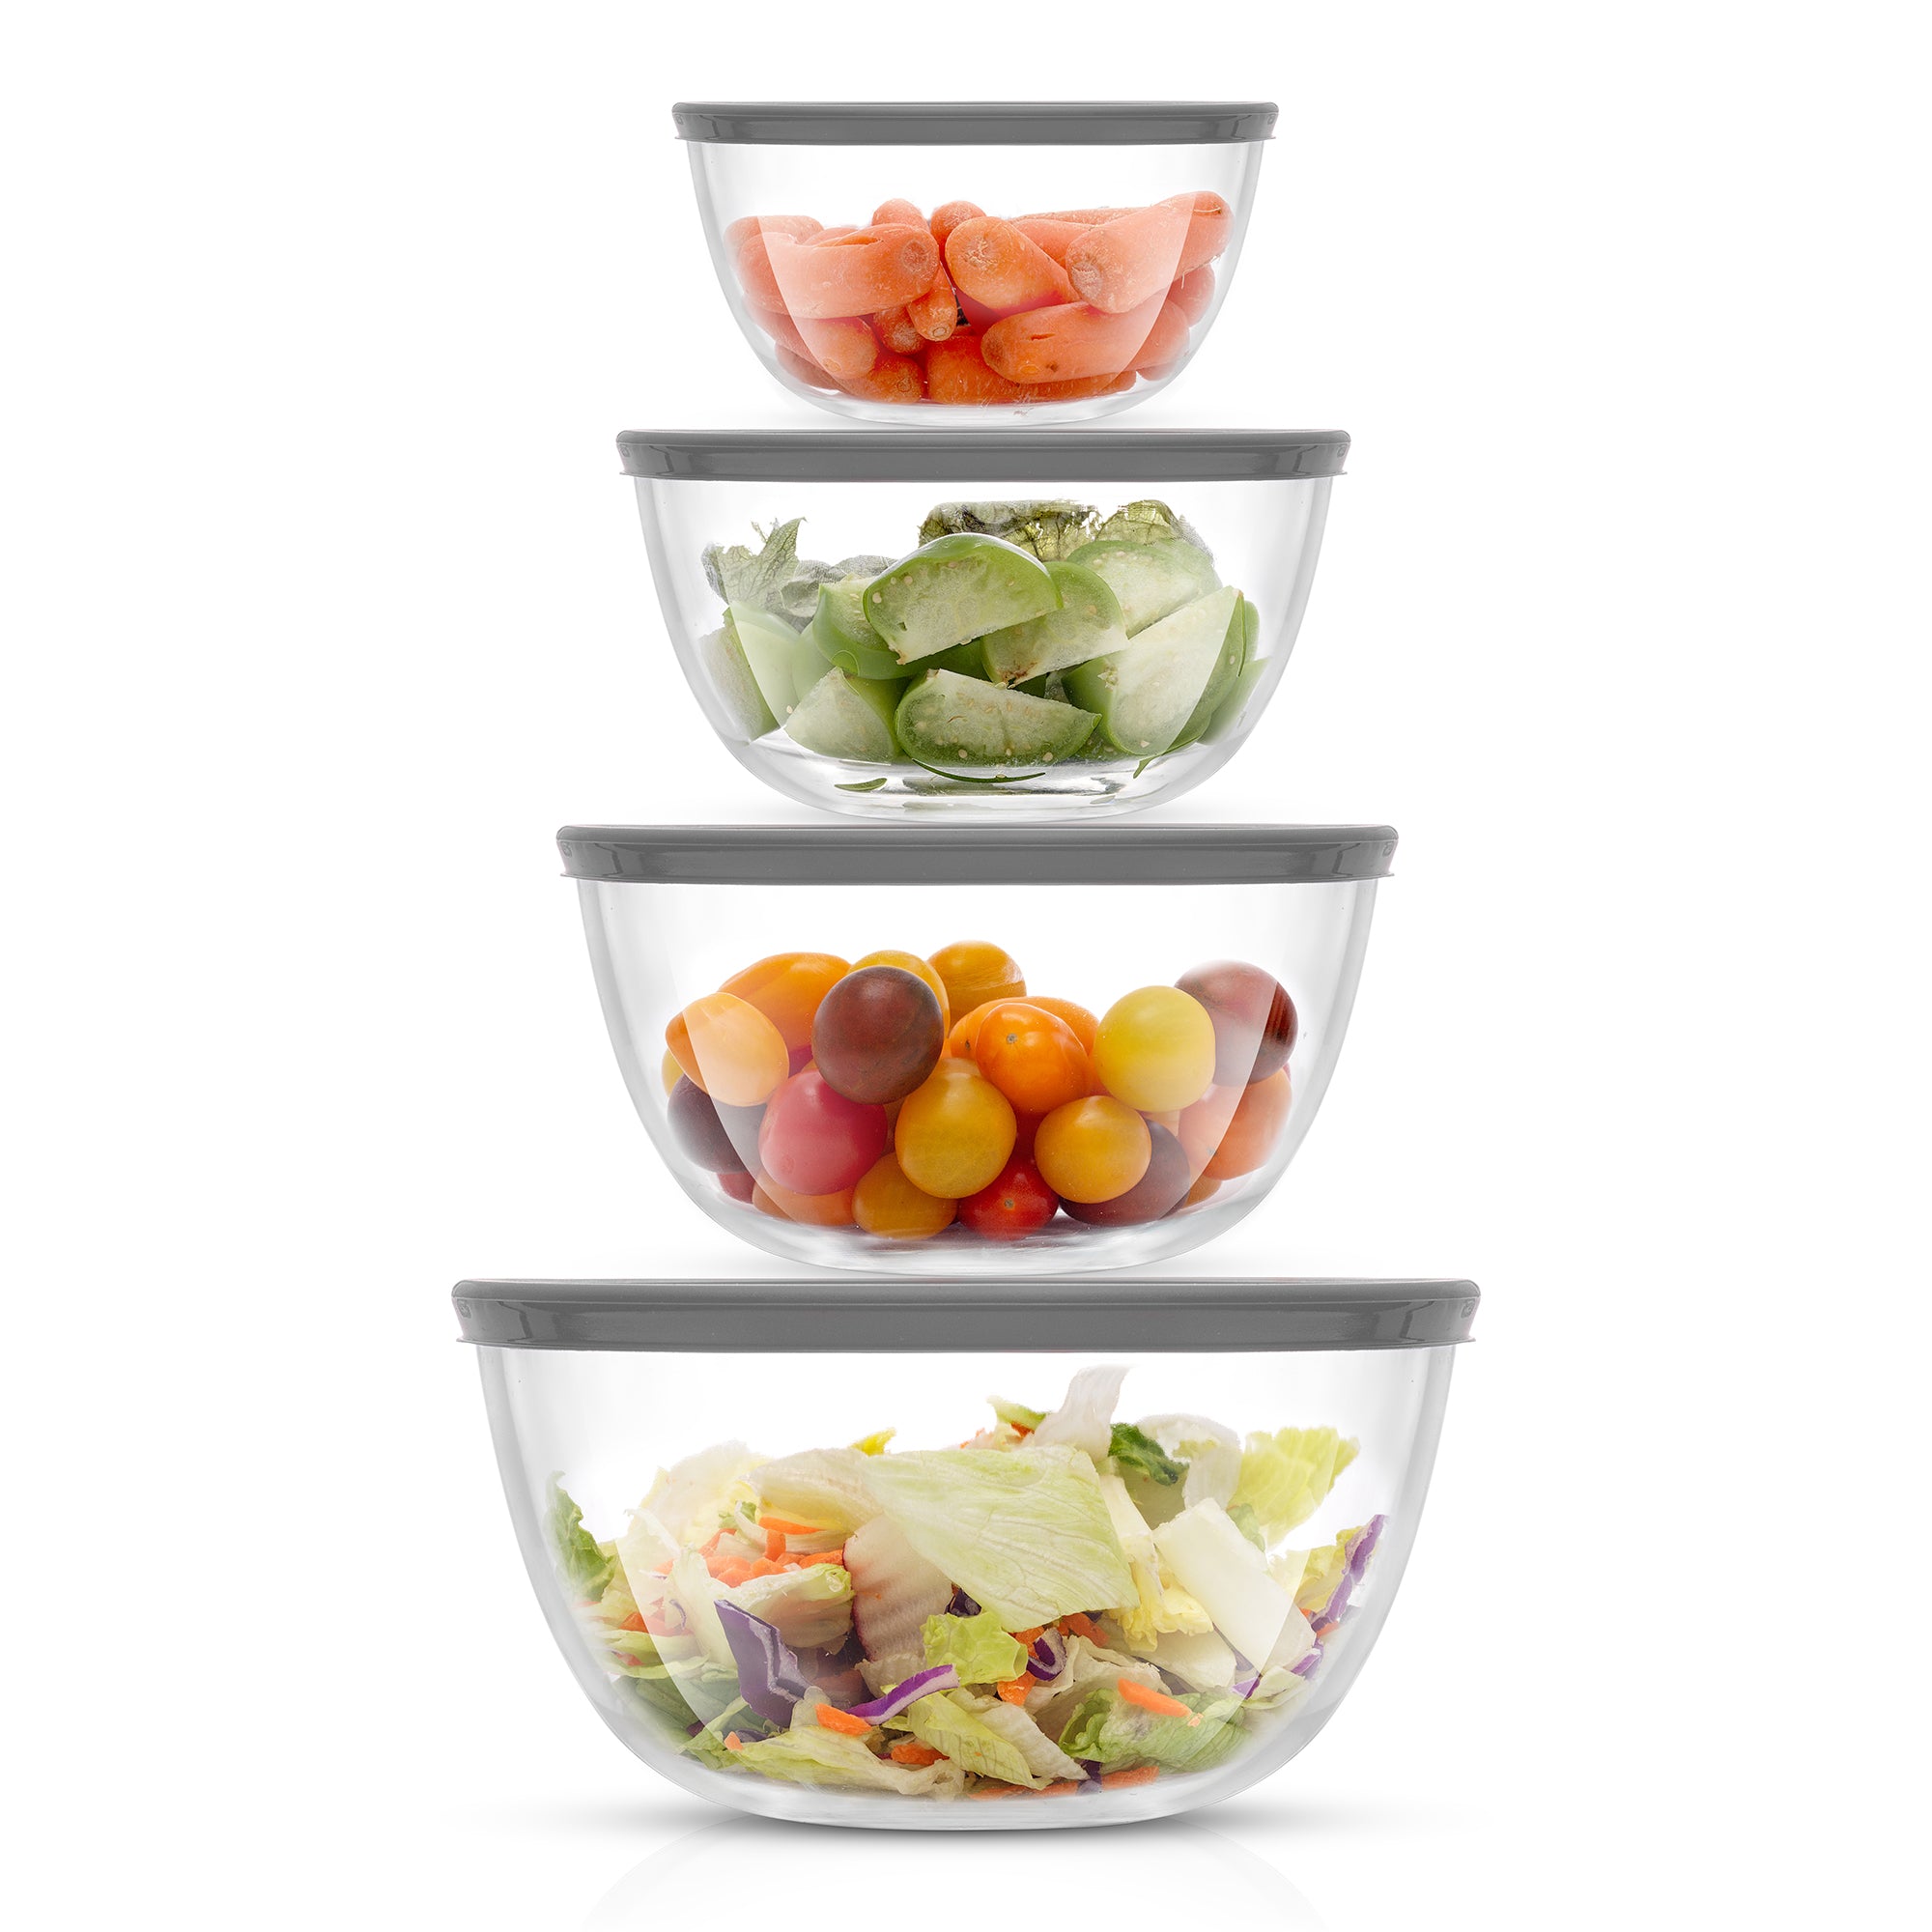  A stack of four glass bowls filled with fruits and vegetables. The bowls sit on a white background.